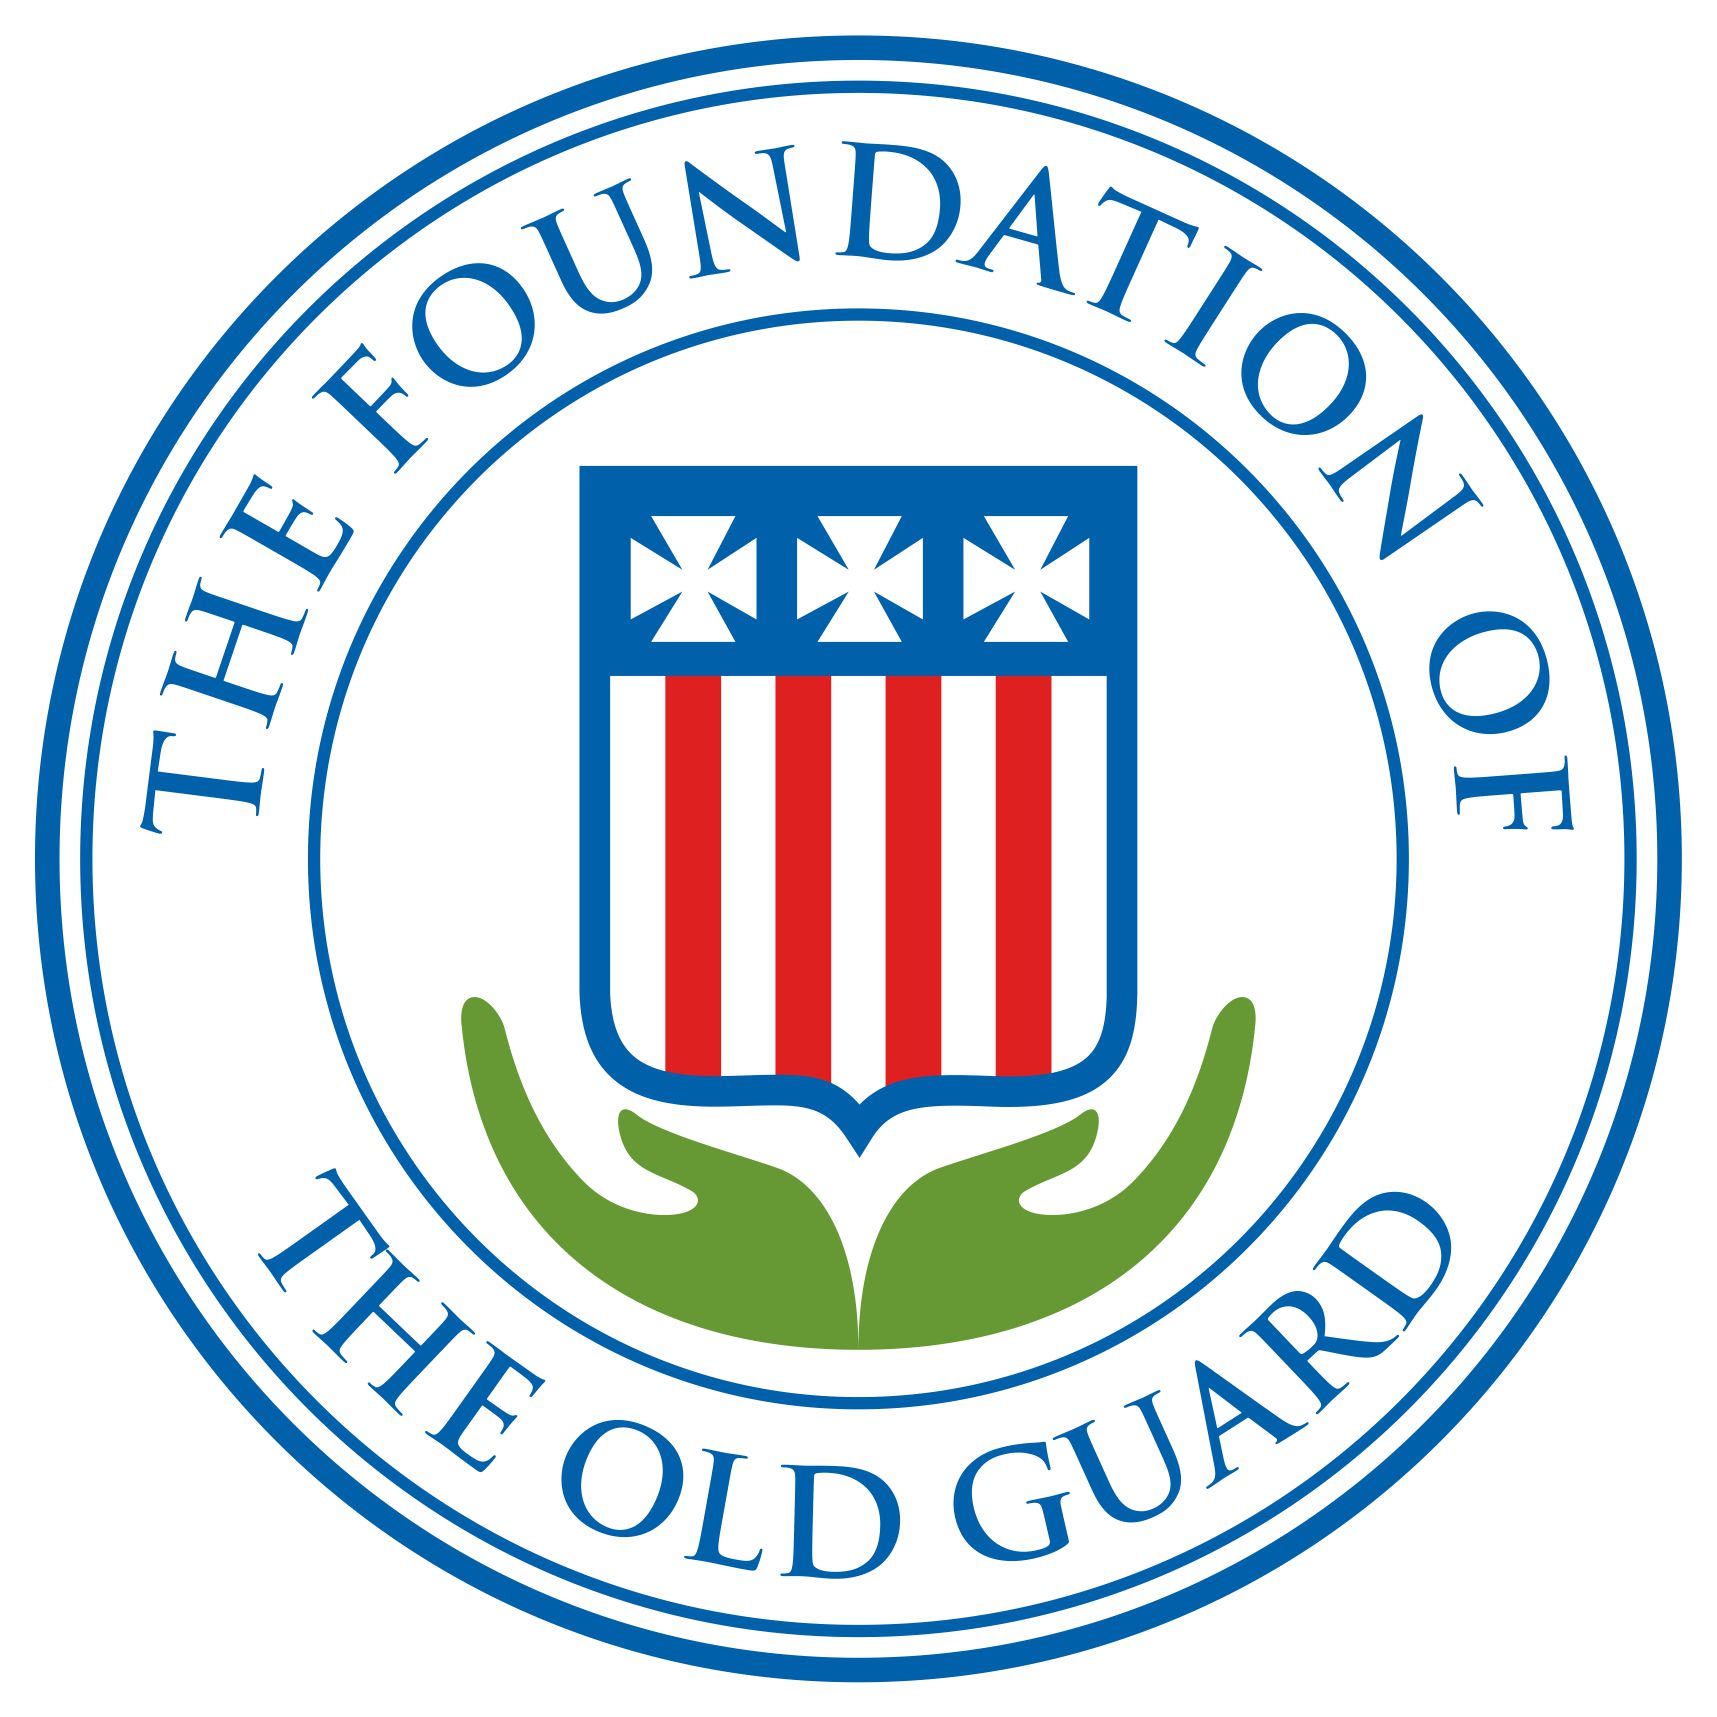 The Foundation Of The Old Guard logo